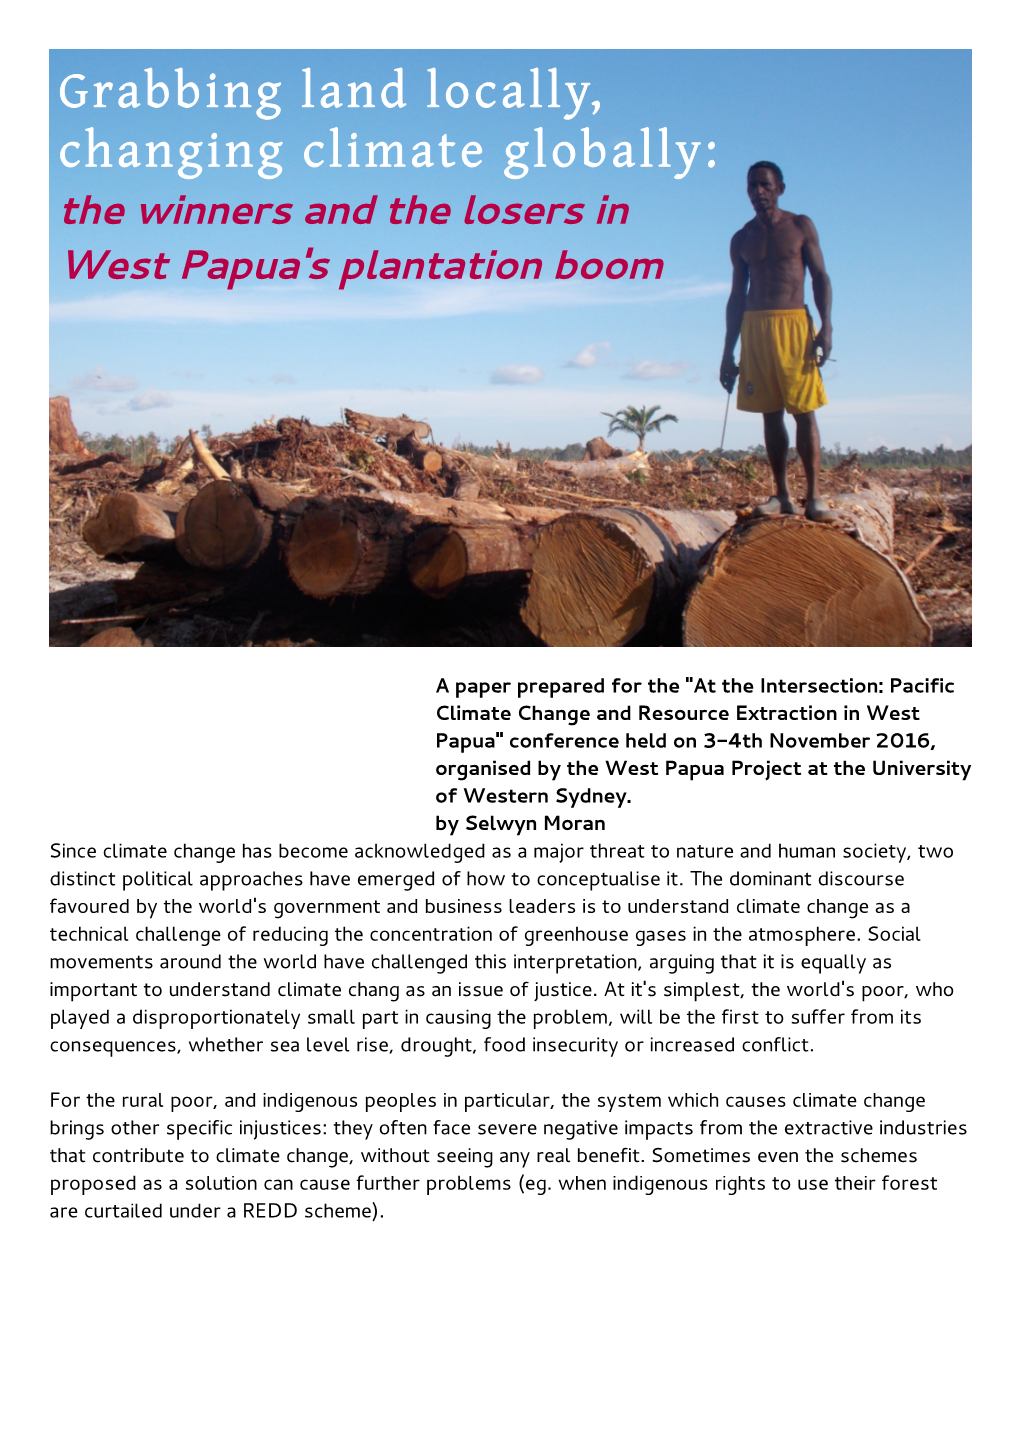 Palm Oil in Papua and Climate Justice